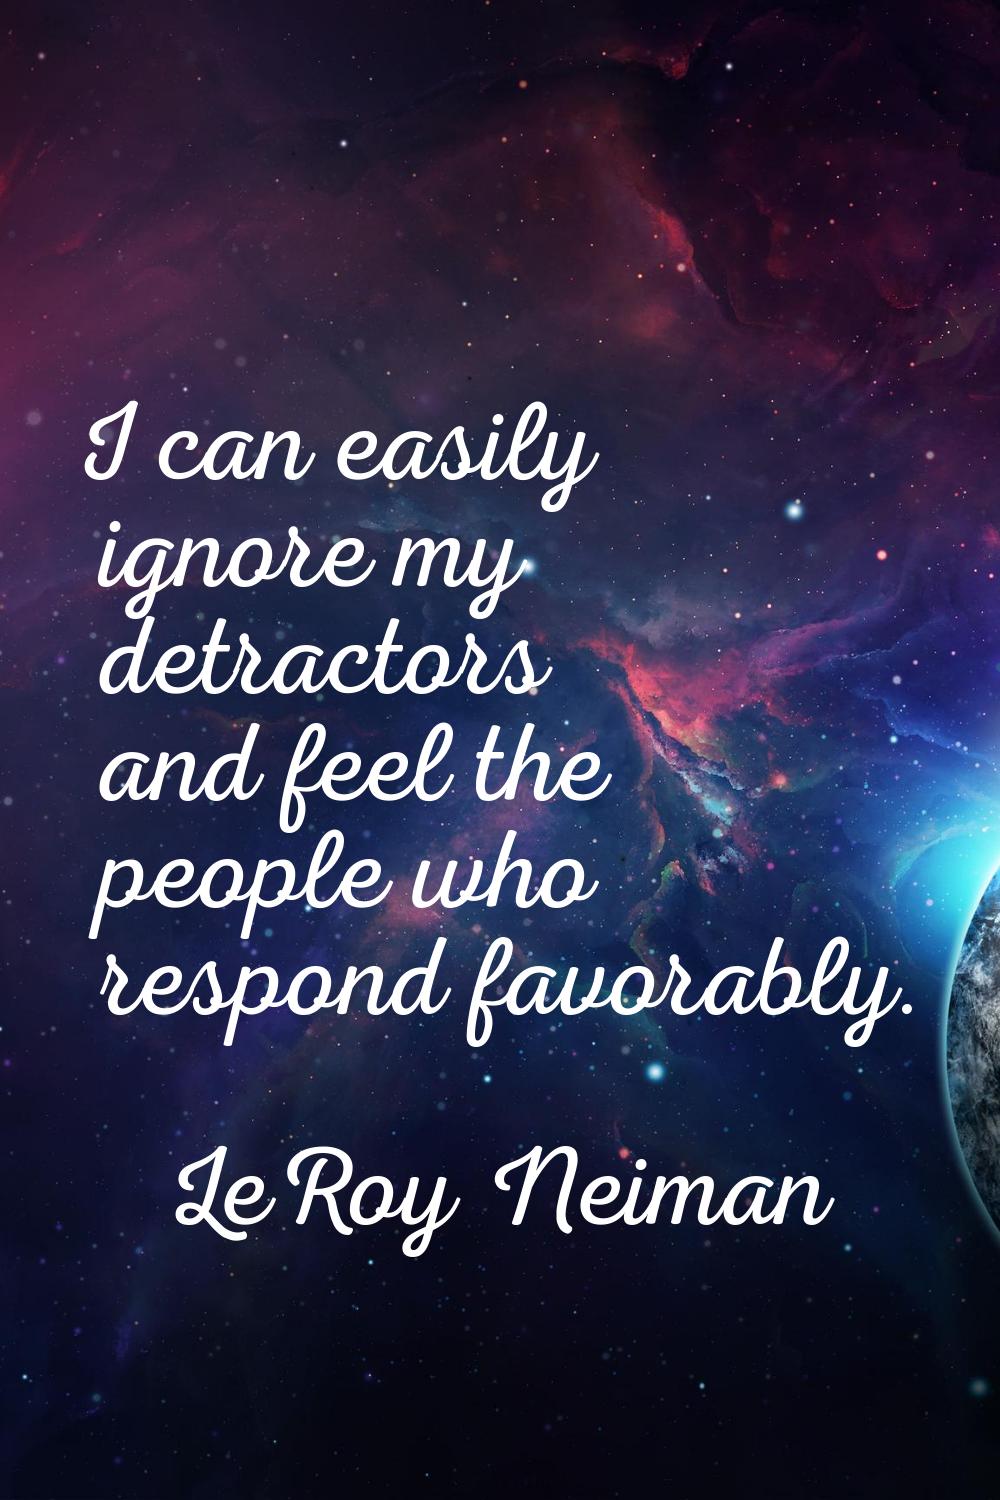 I can easily ignore my detractors and feel the people who respond favorably.